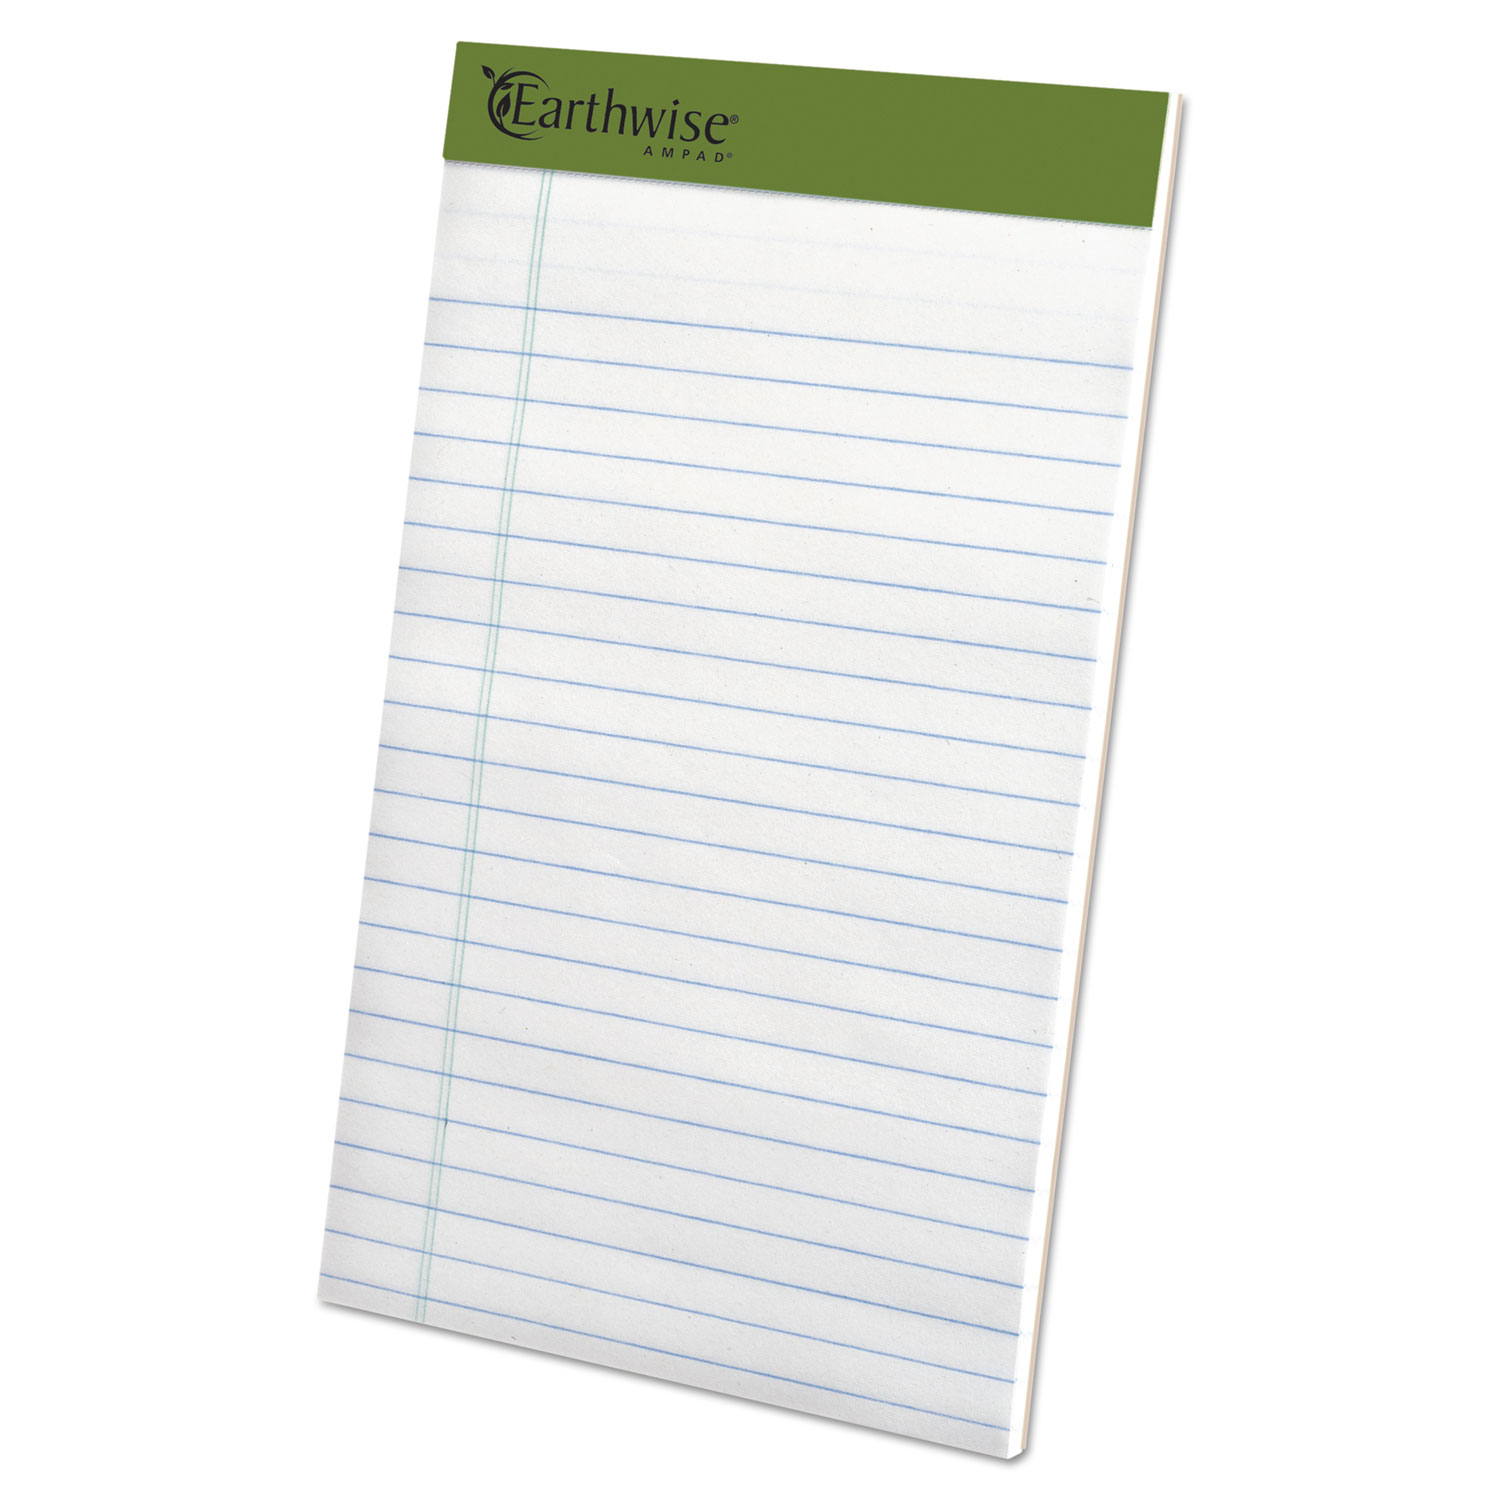 Ampad® Earthwise Recycled Paper Legal Pads, Wide/Legal Rule, 5 x 8, White, 40 Sheets, 6/Pack